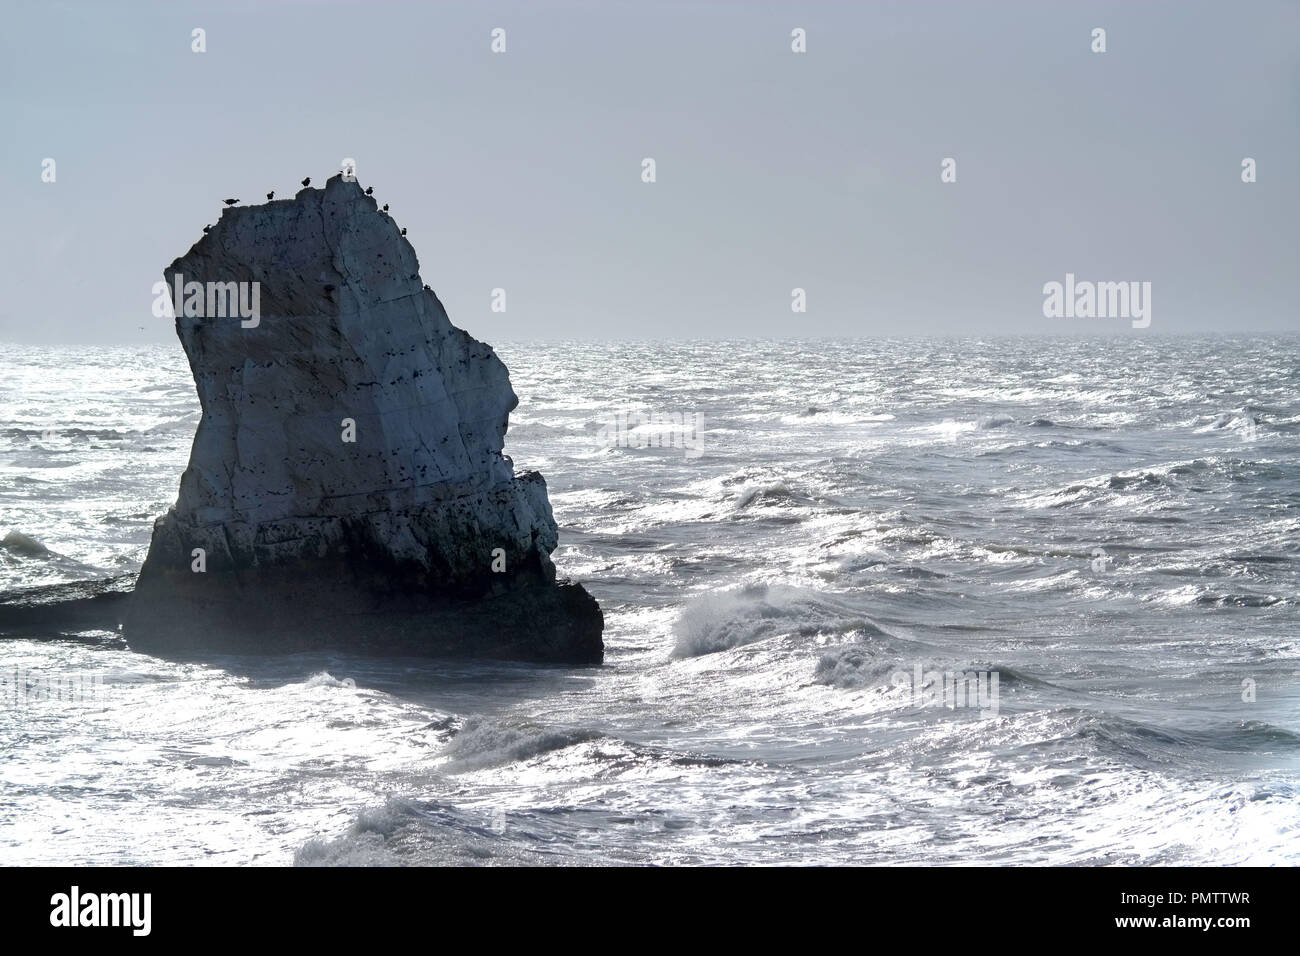 Seaford, East Susse. UK. 19th September 2018. Seagulls perched on a chalk sea rock on the South Coast near Seaford, East Sussex. ©Peter Cripps/Alamy Live News Stock Photo